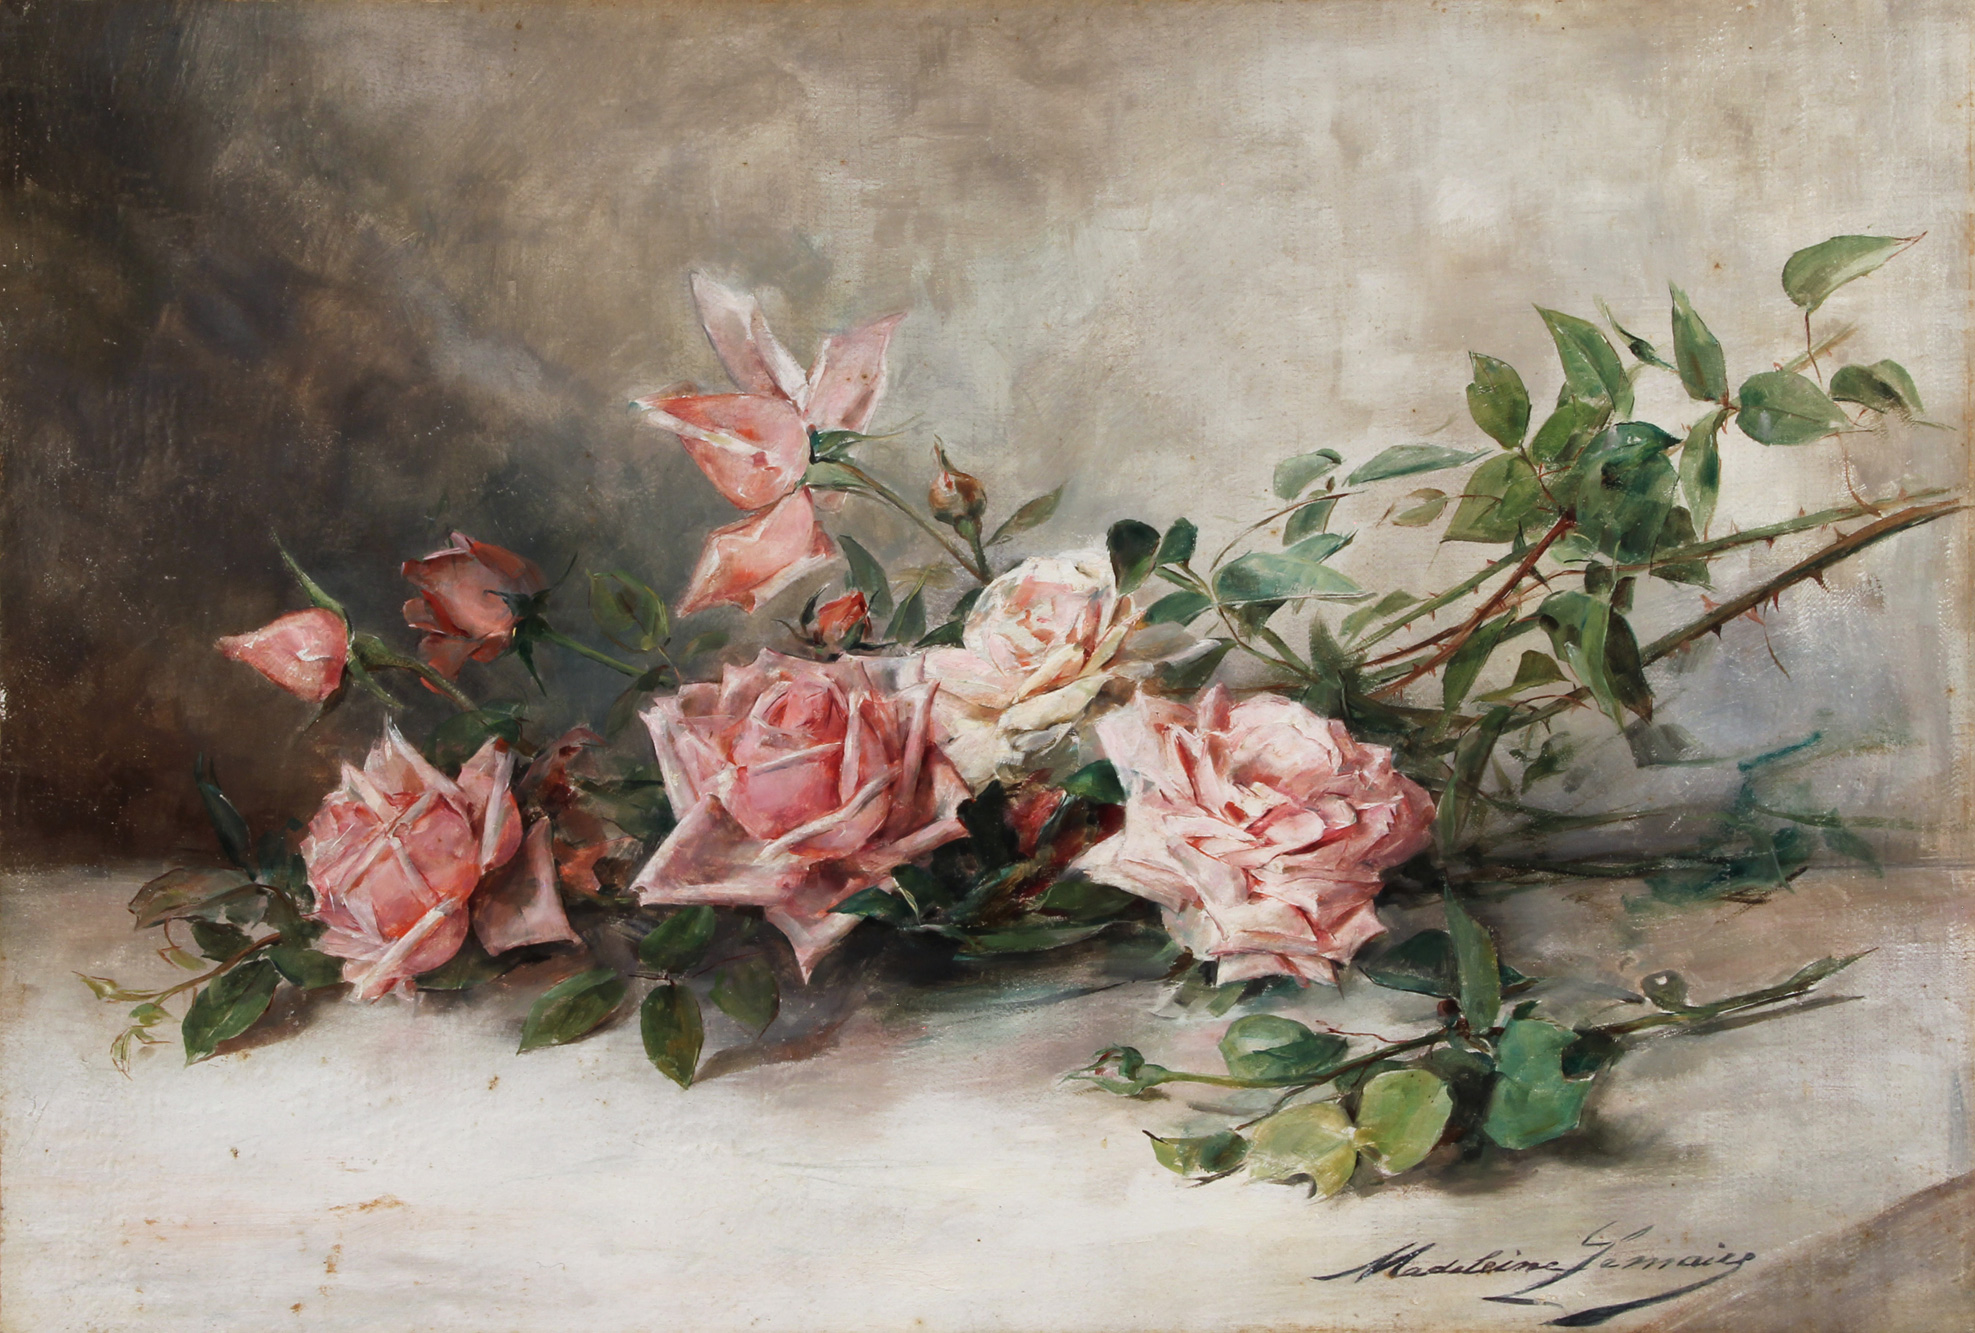 LEMAIRE, Madeleine Jeanne 'BRANCHES DE ROSES'